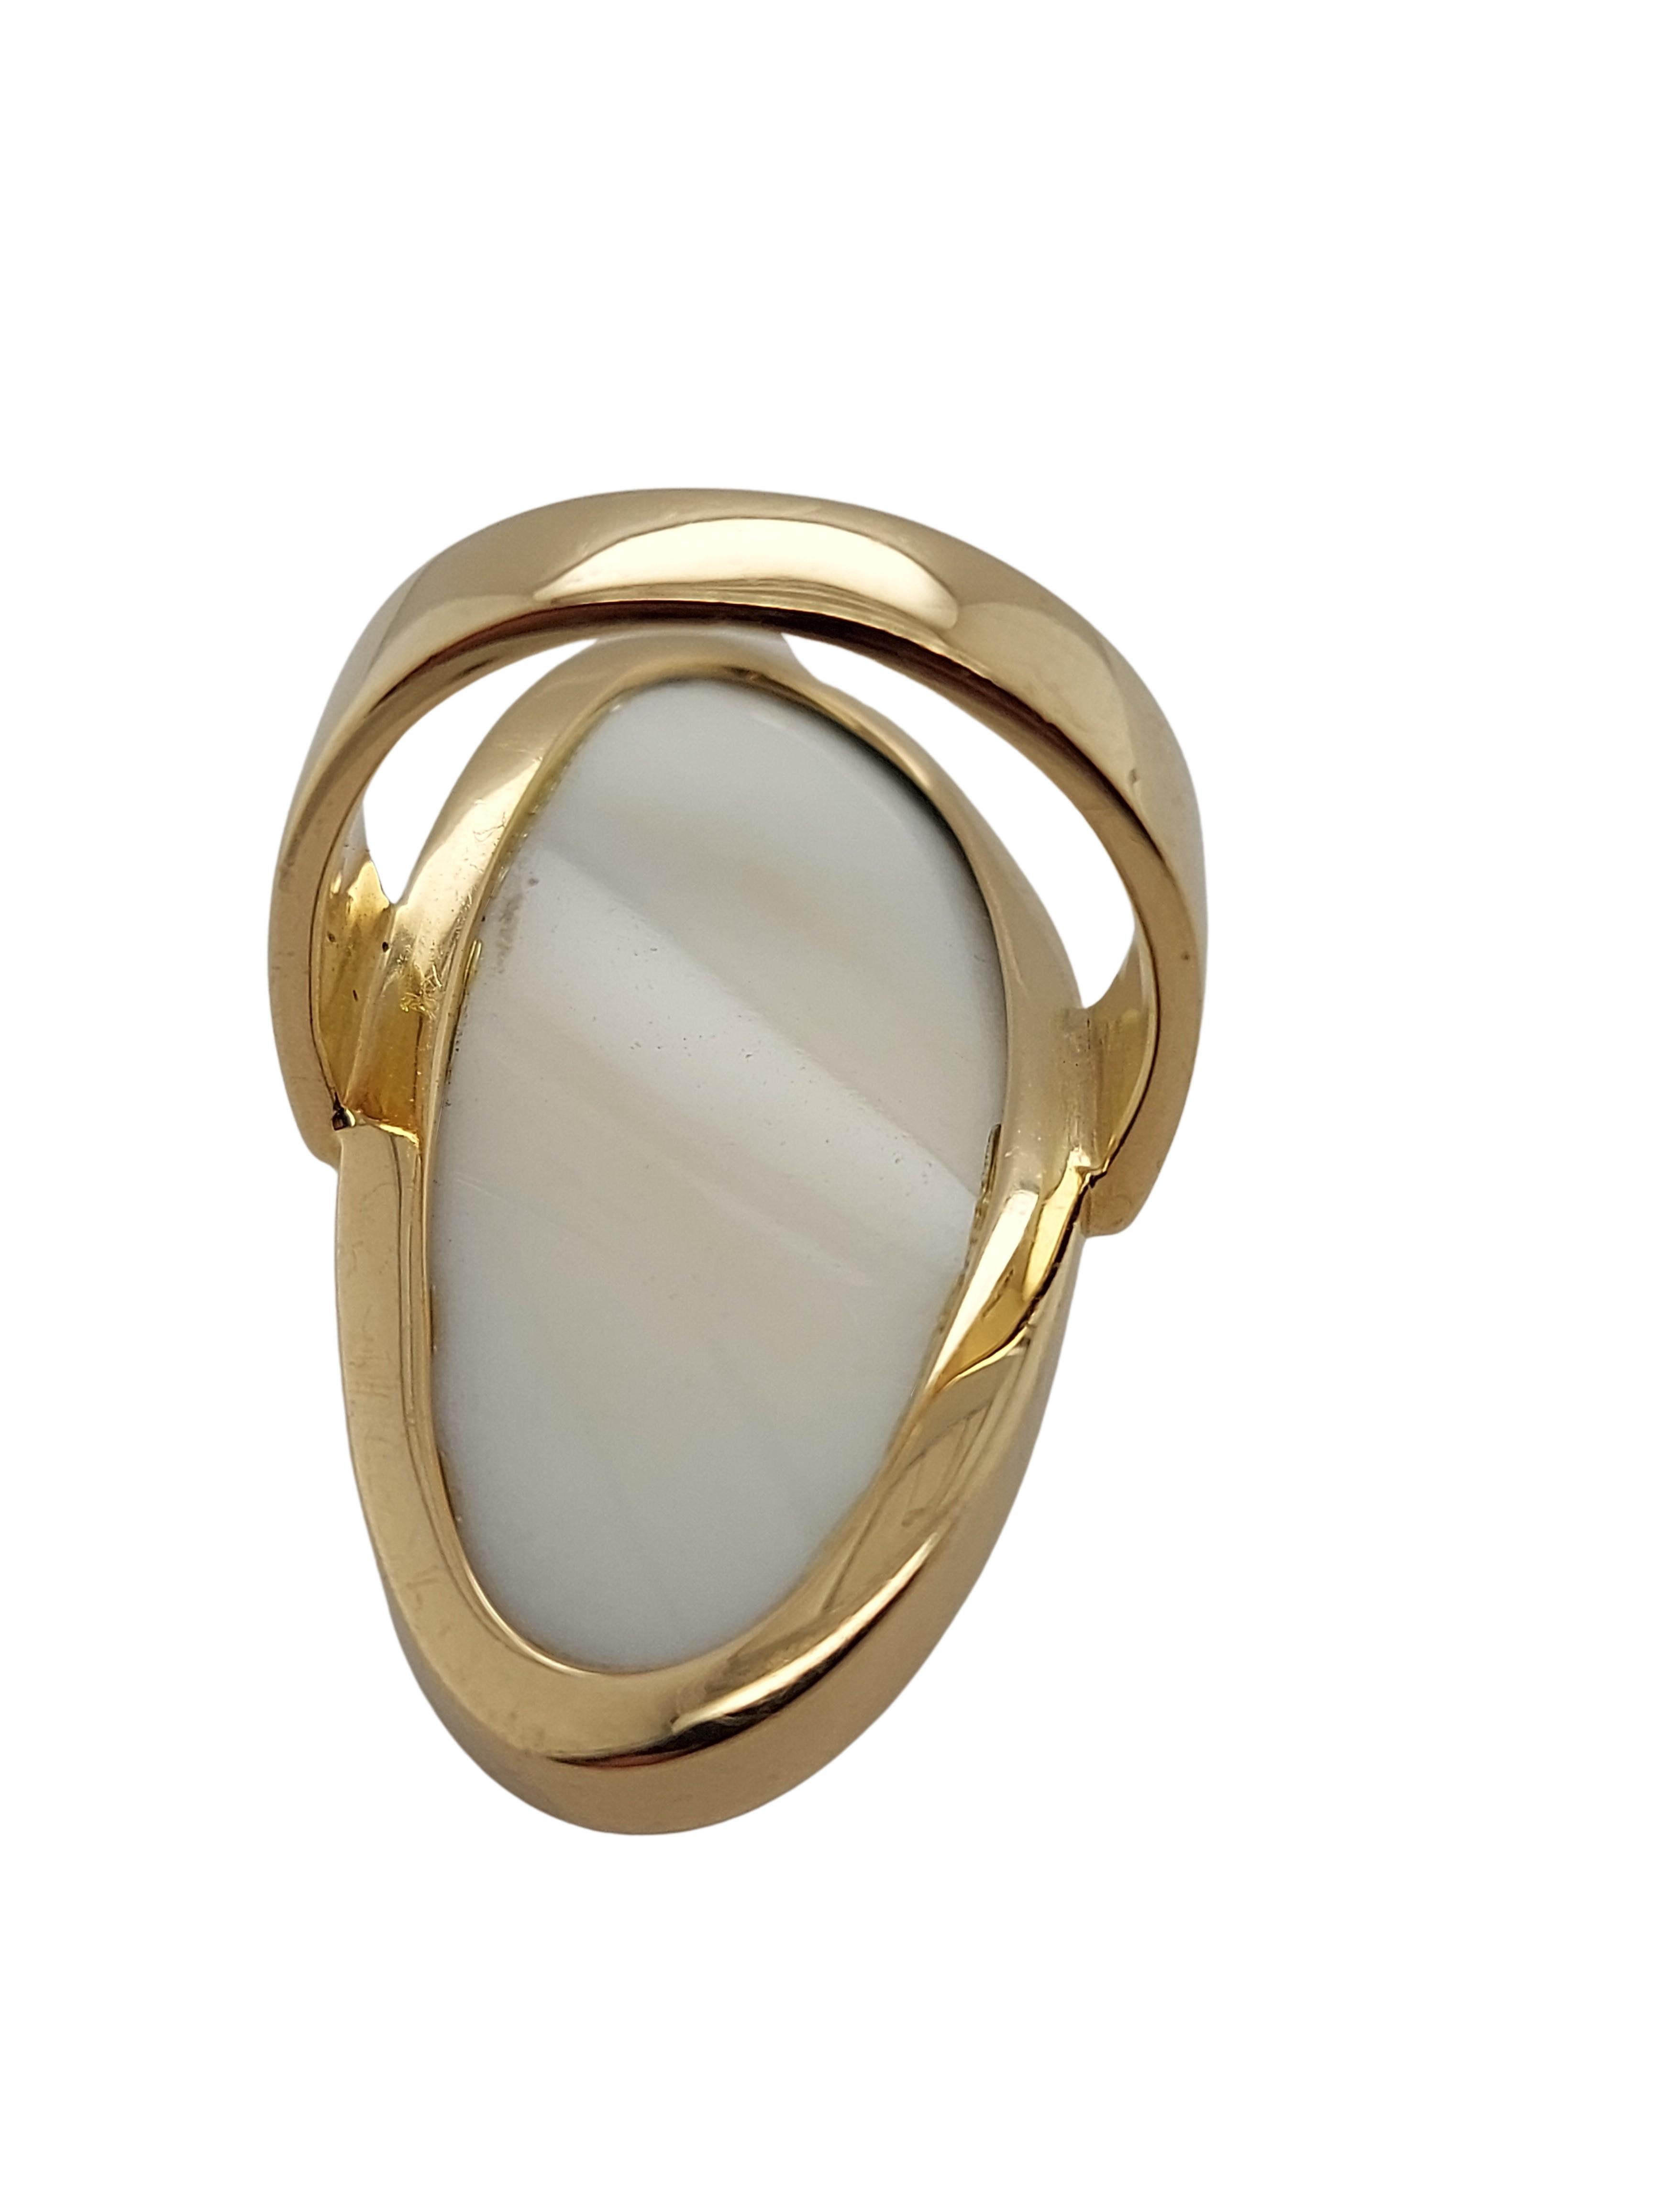 Magnificent and Rare 18kt Yellow Gold Mattioli Hiroko Ring with Kogolong For Sale 5